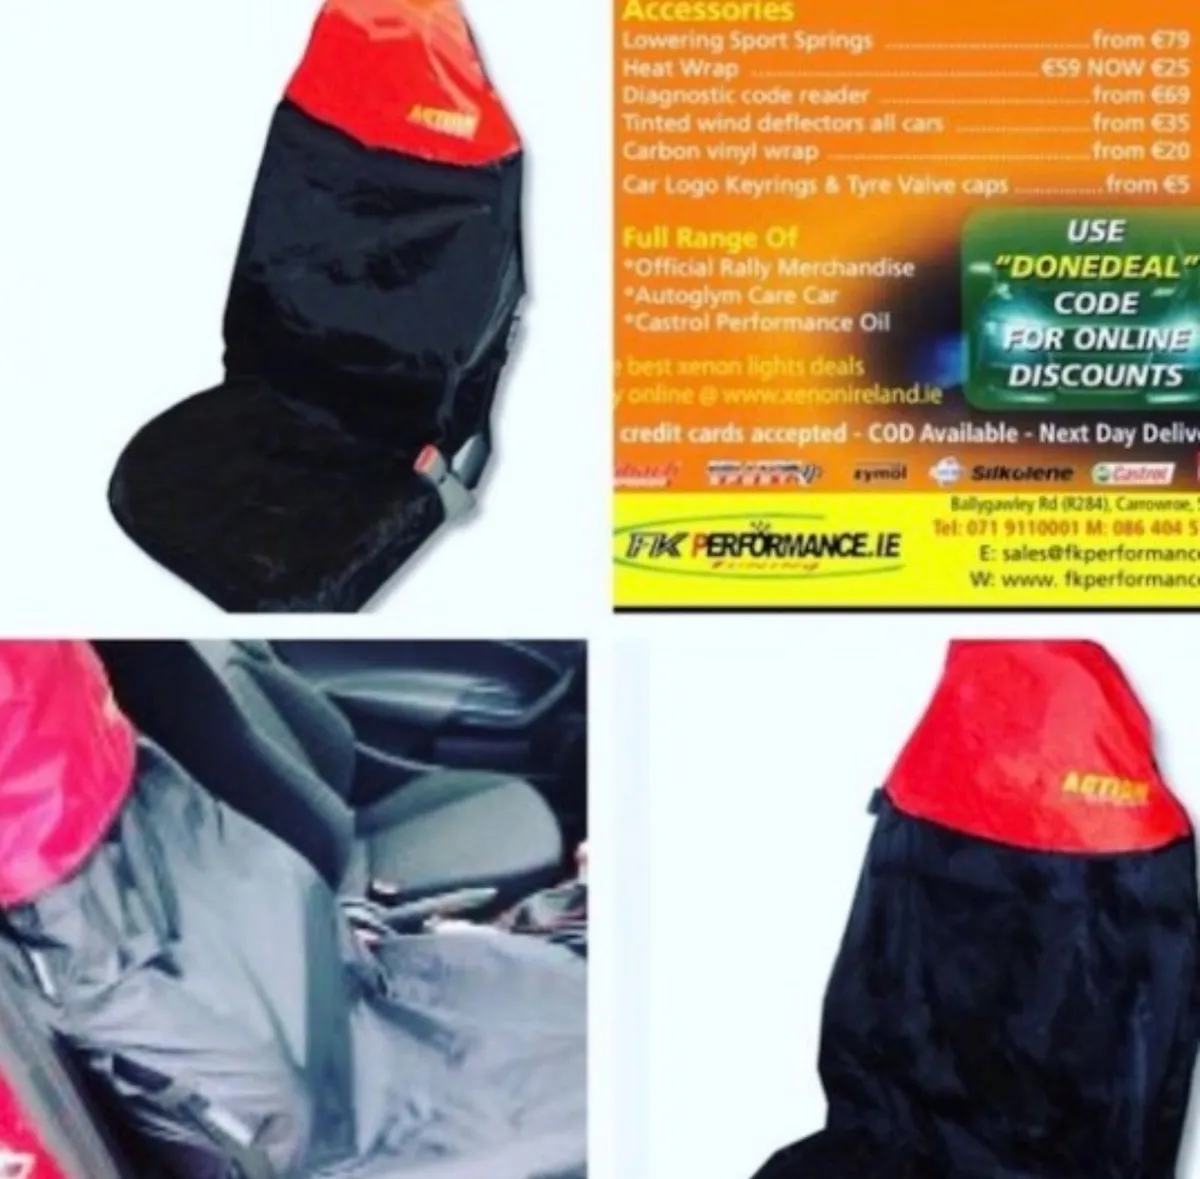 Action sport seat covers specials